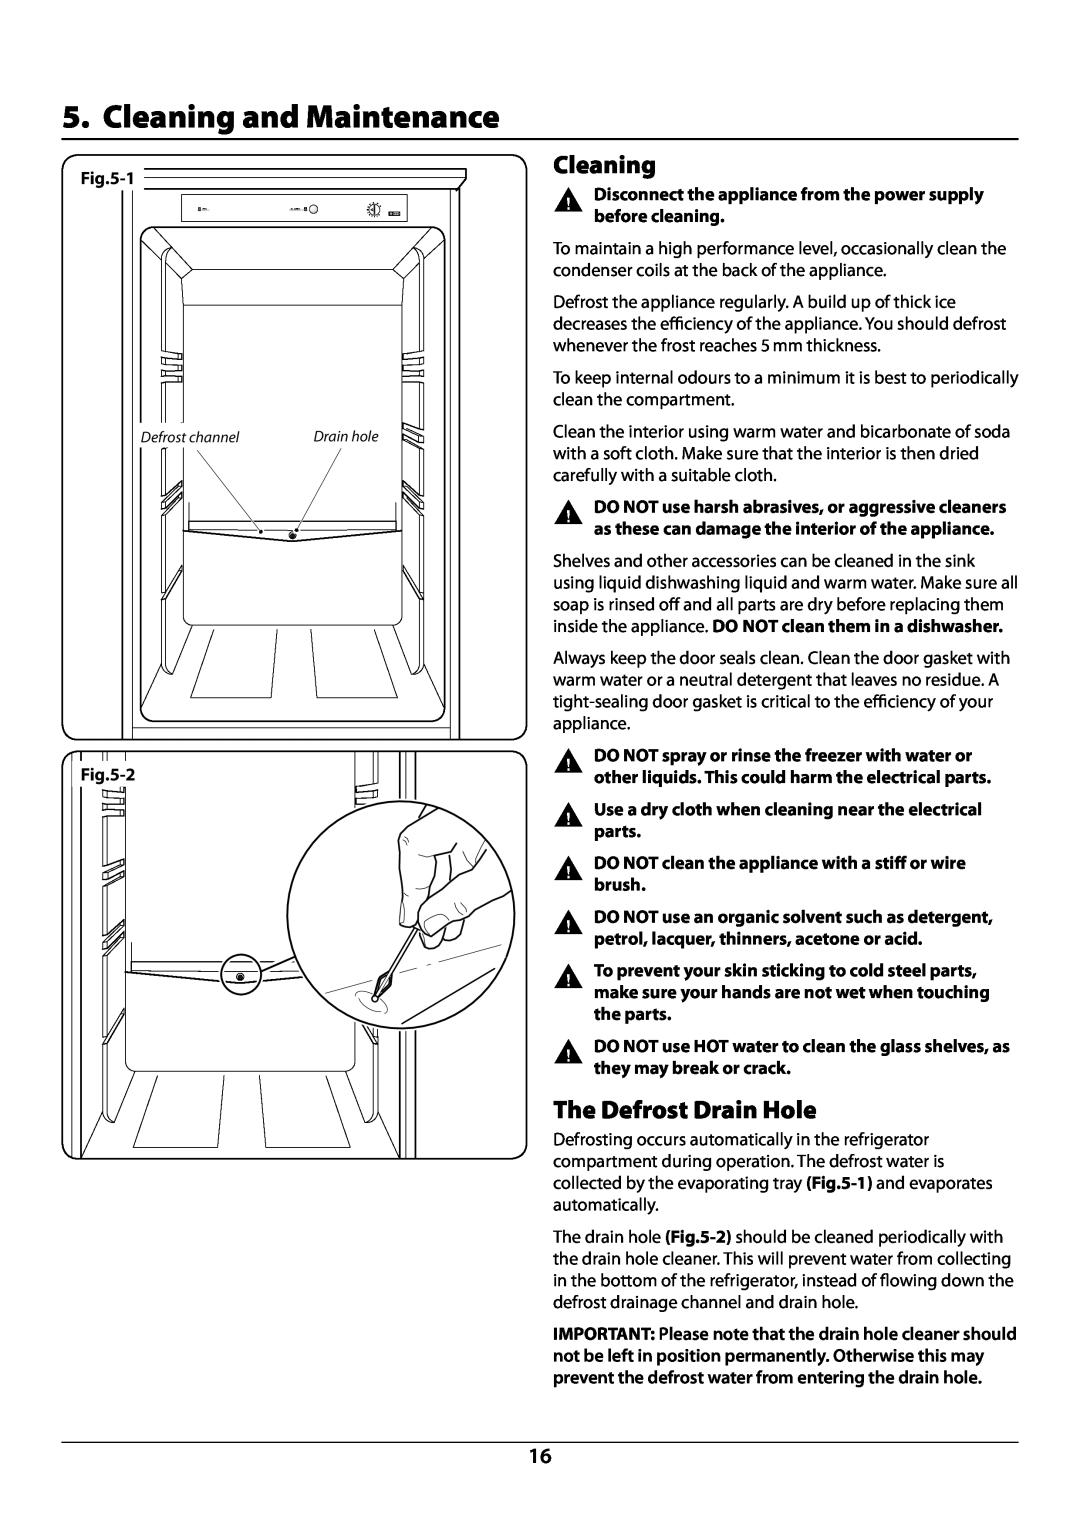 Rangemaster U110122-01B Cleaning and Maintenance, The Defrost Drain Hole, Disconnect the appliance from the power supply 